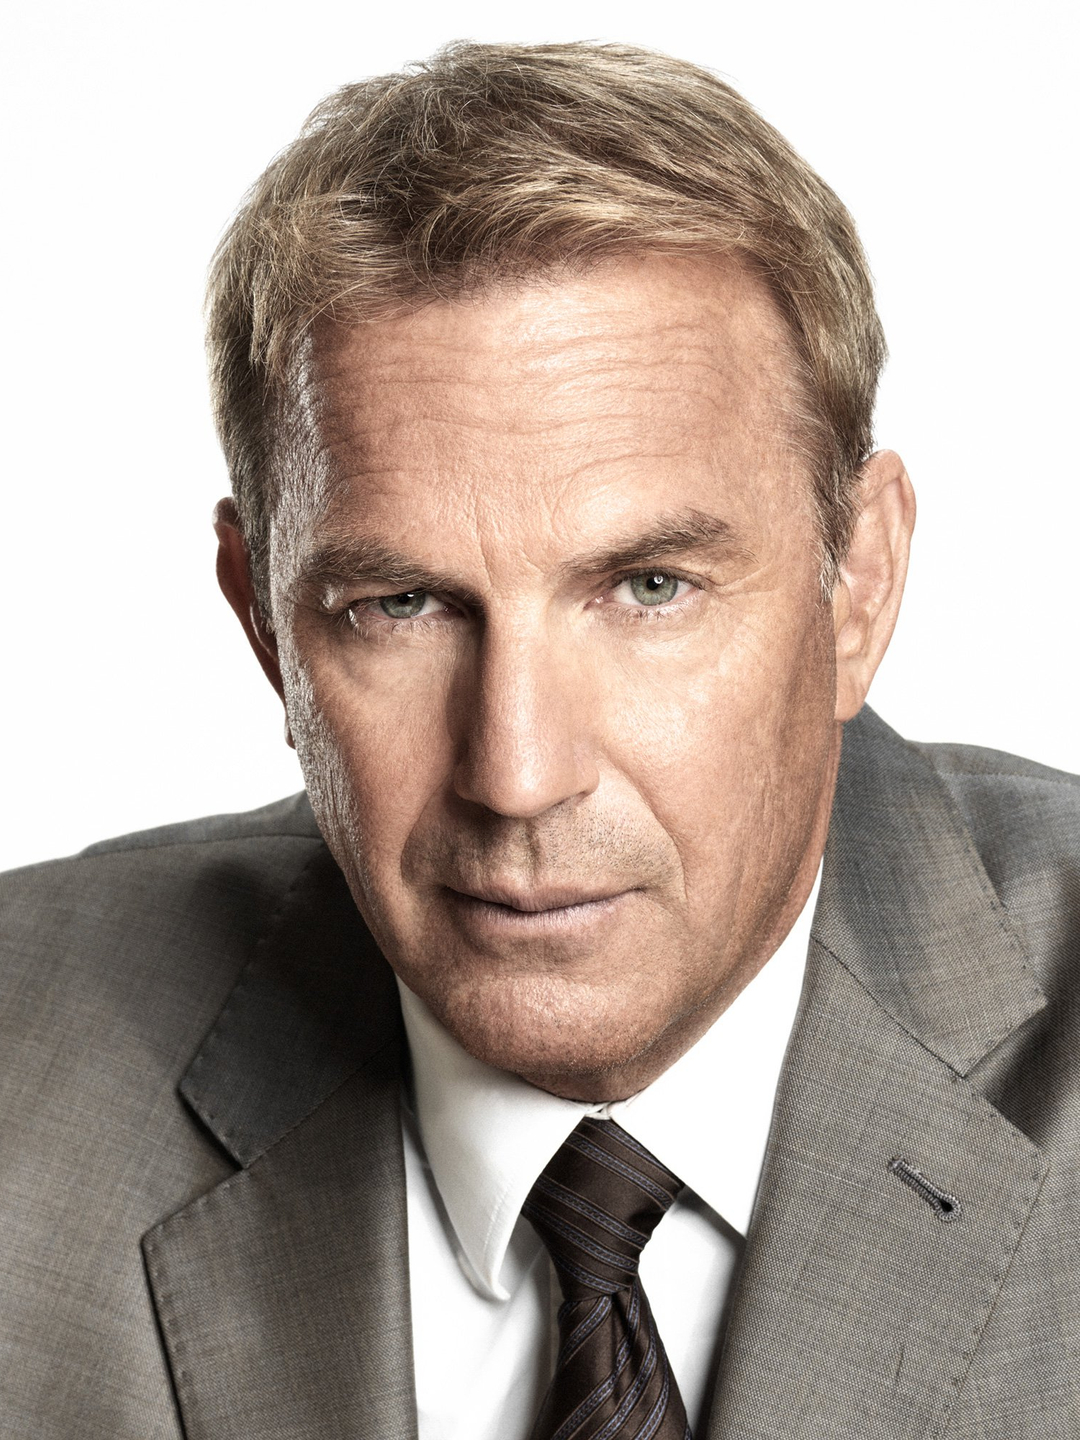 Kevin Costner who is his father